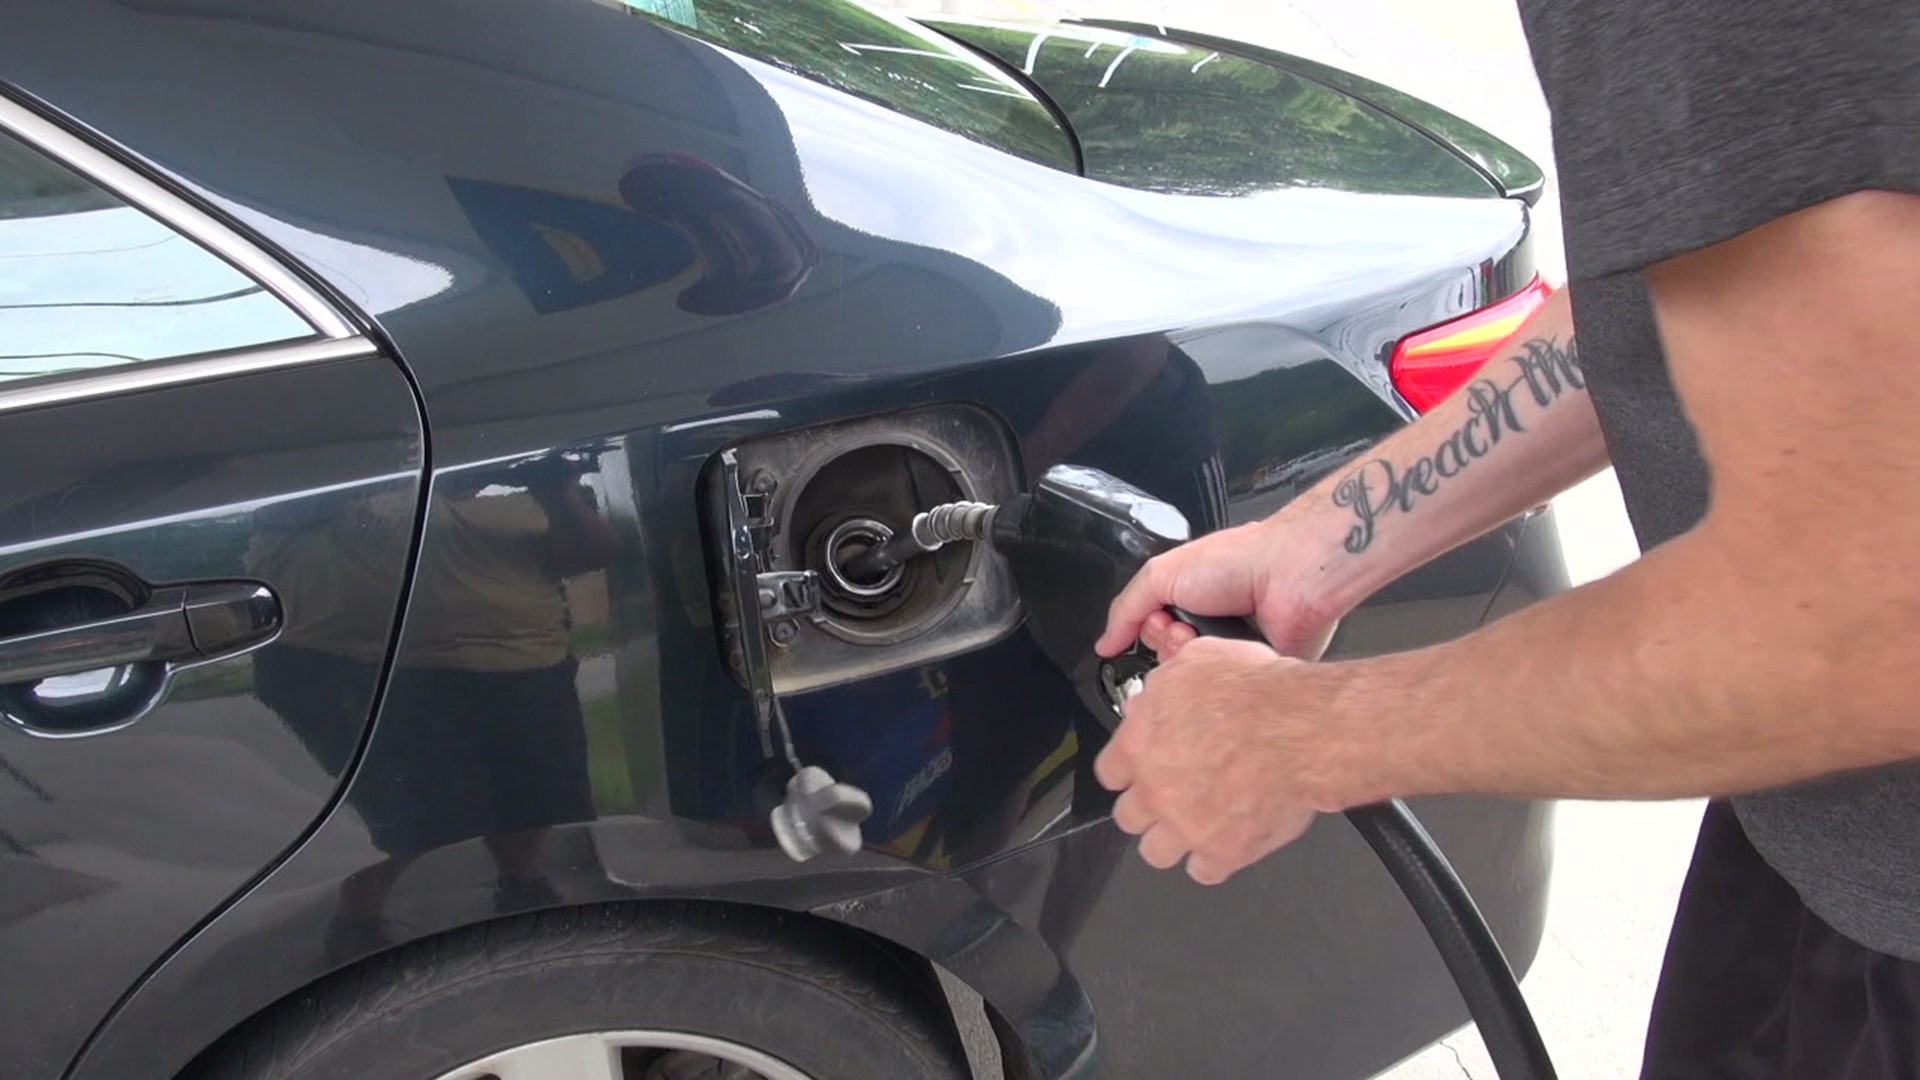 According to AAA, the average gas price of $3.17 per gallon is the highest cost of gas for the Fourth of July since 2014.